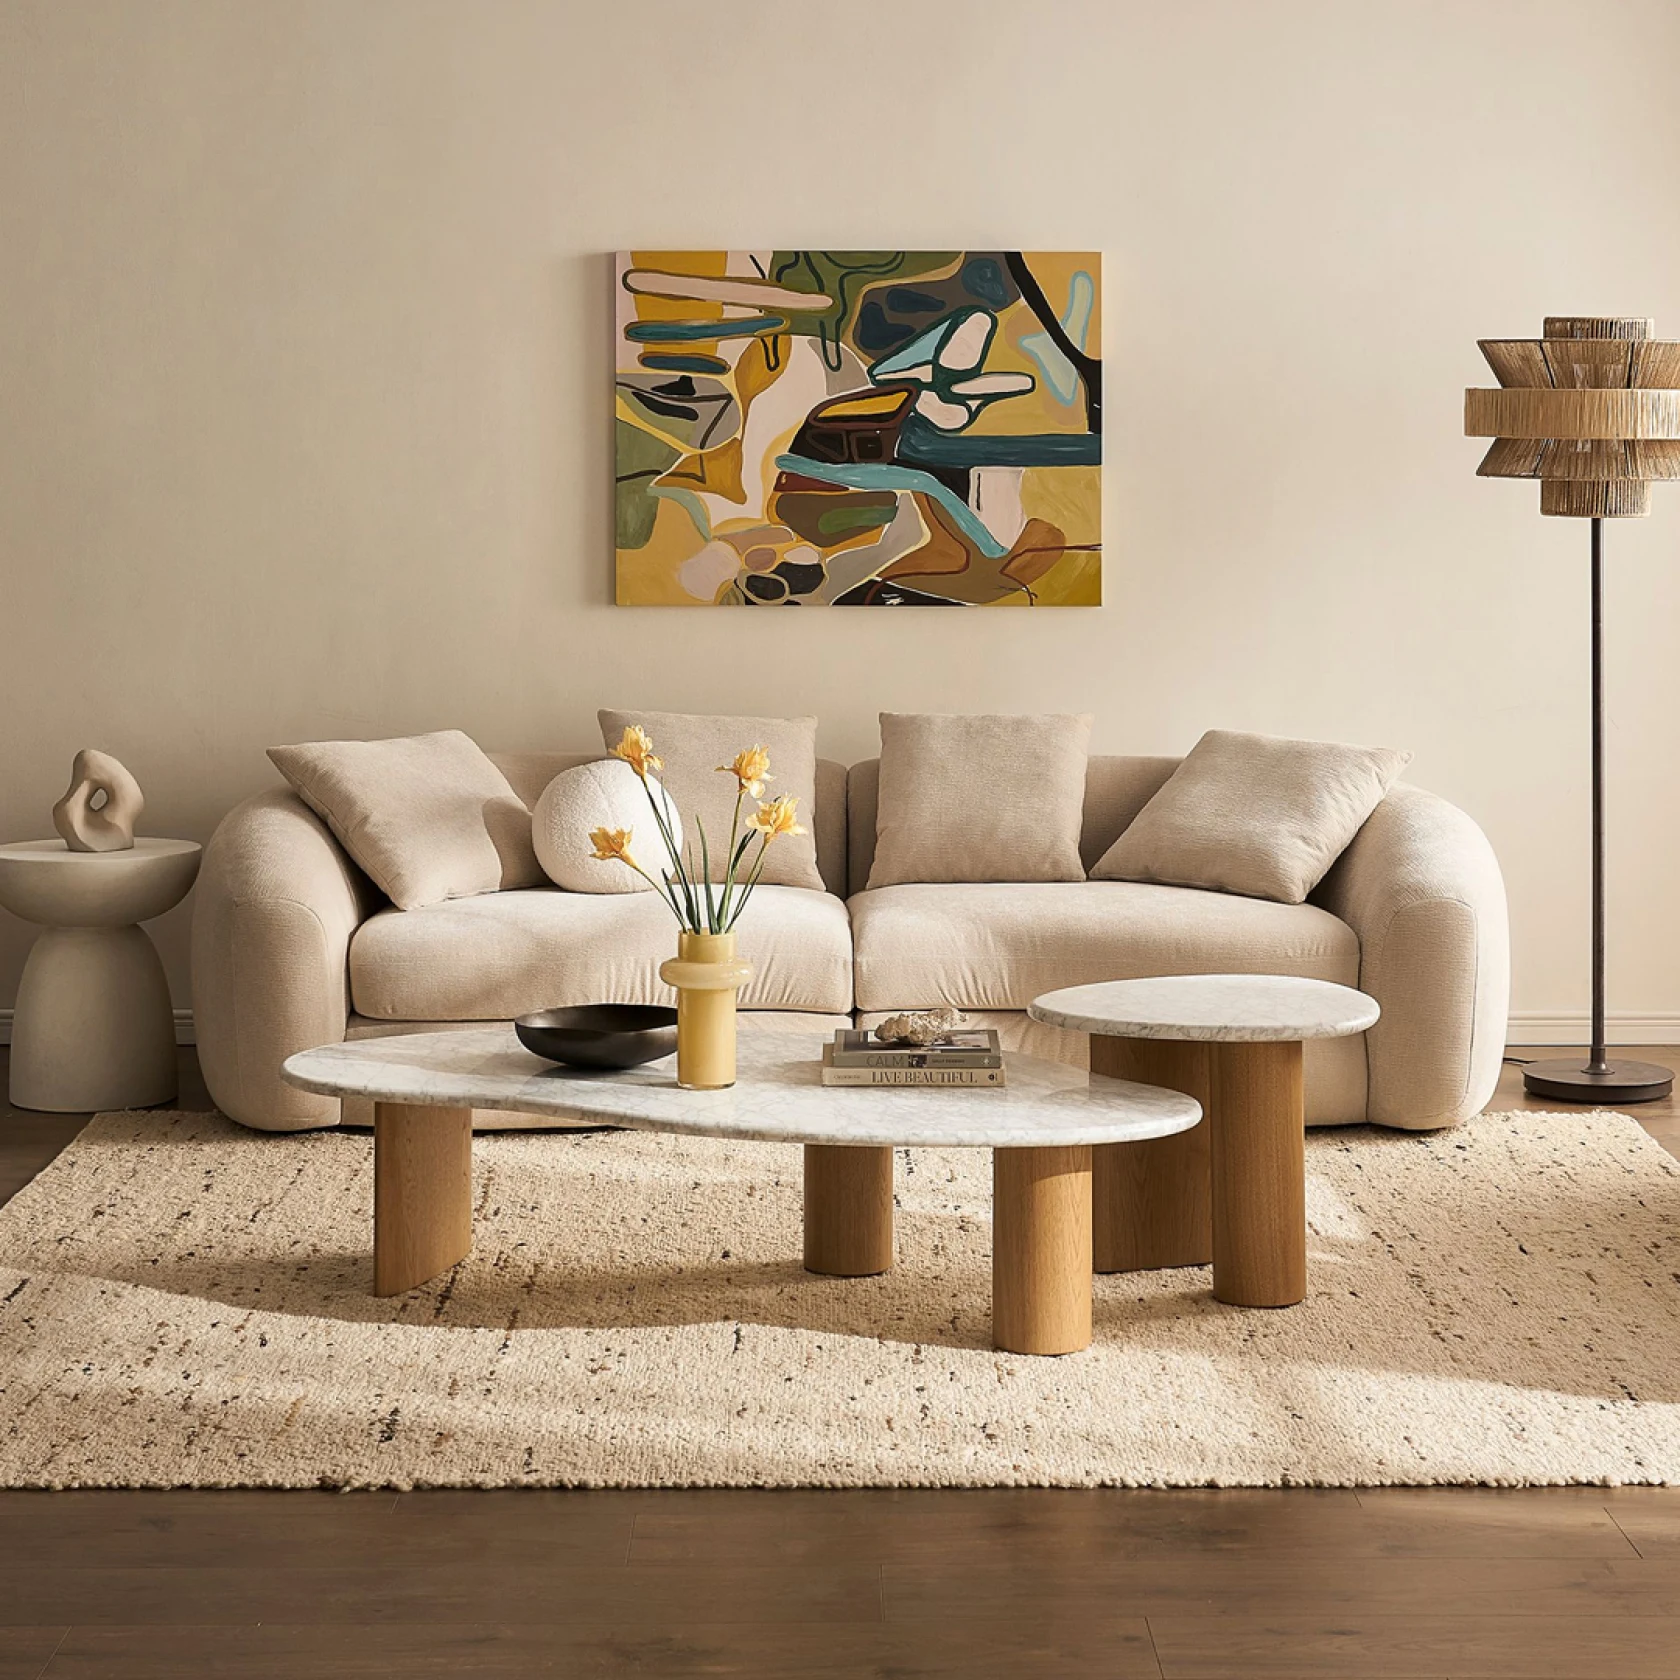 Beautiful cream couch with stylish coffee table, art, and standing lamp